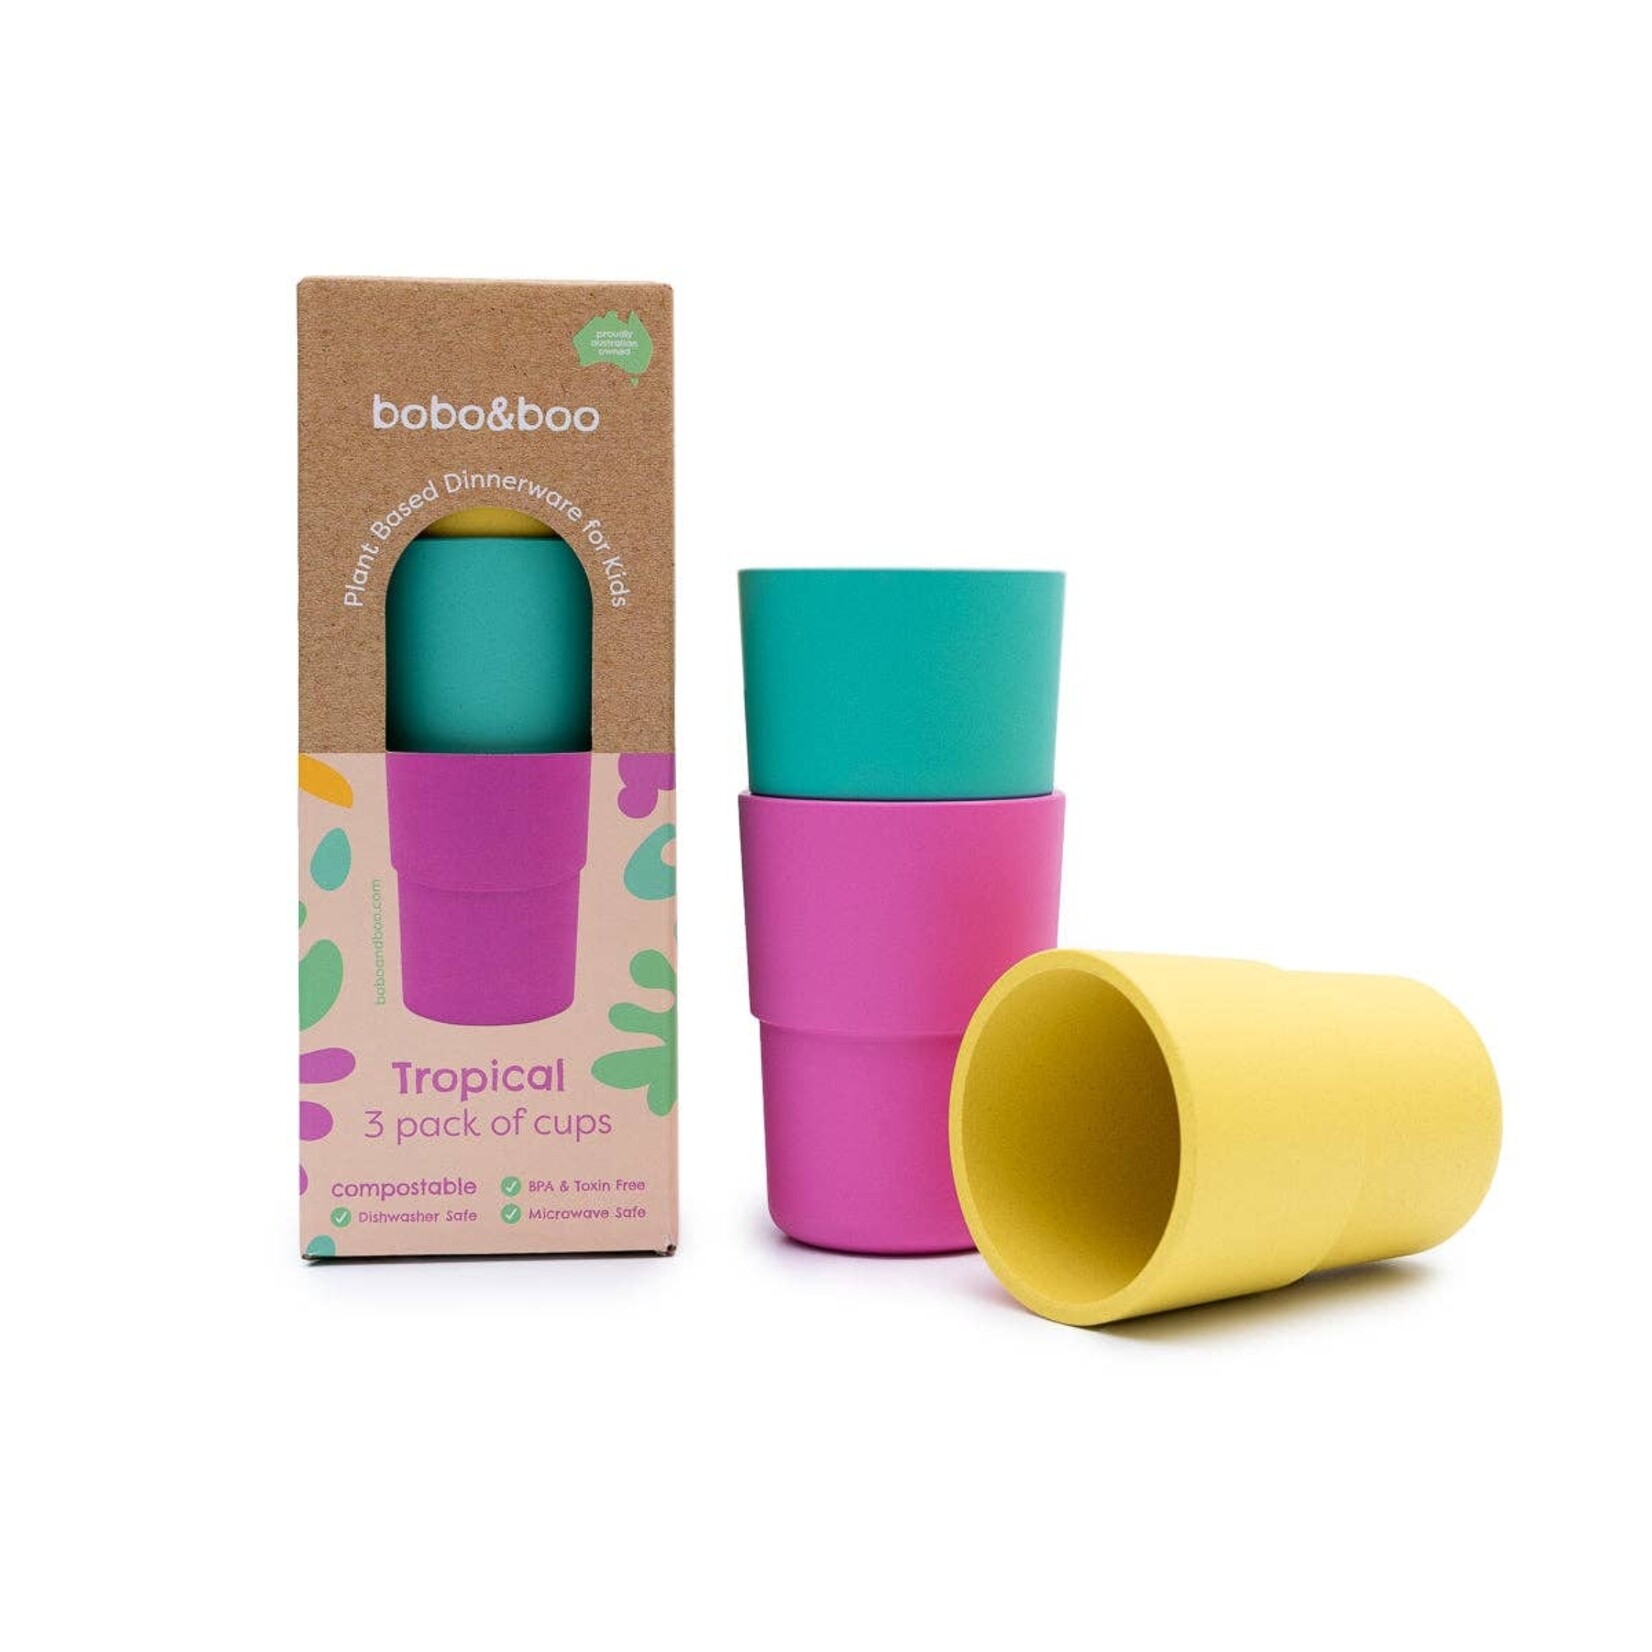 bobo & boo bamboo 3 pack of cups